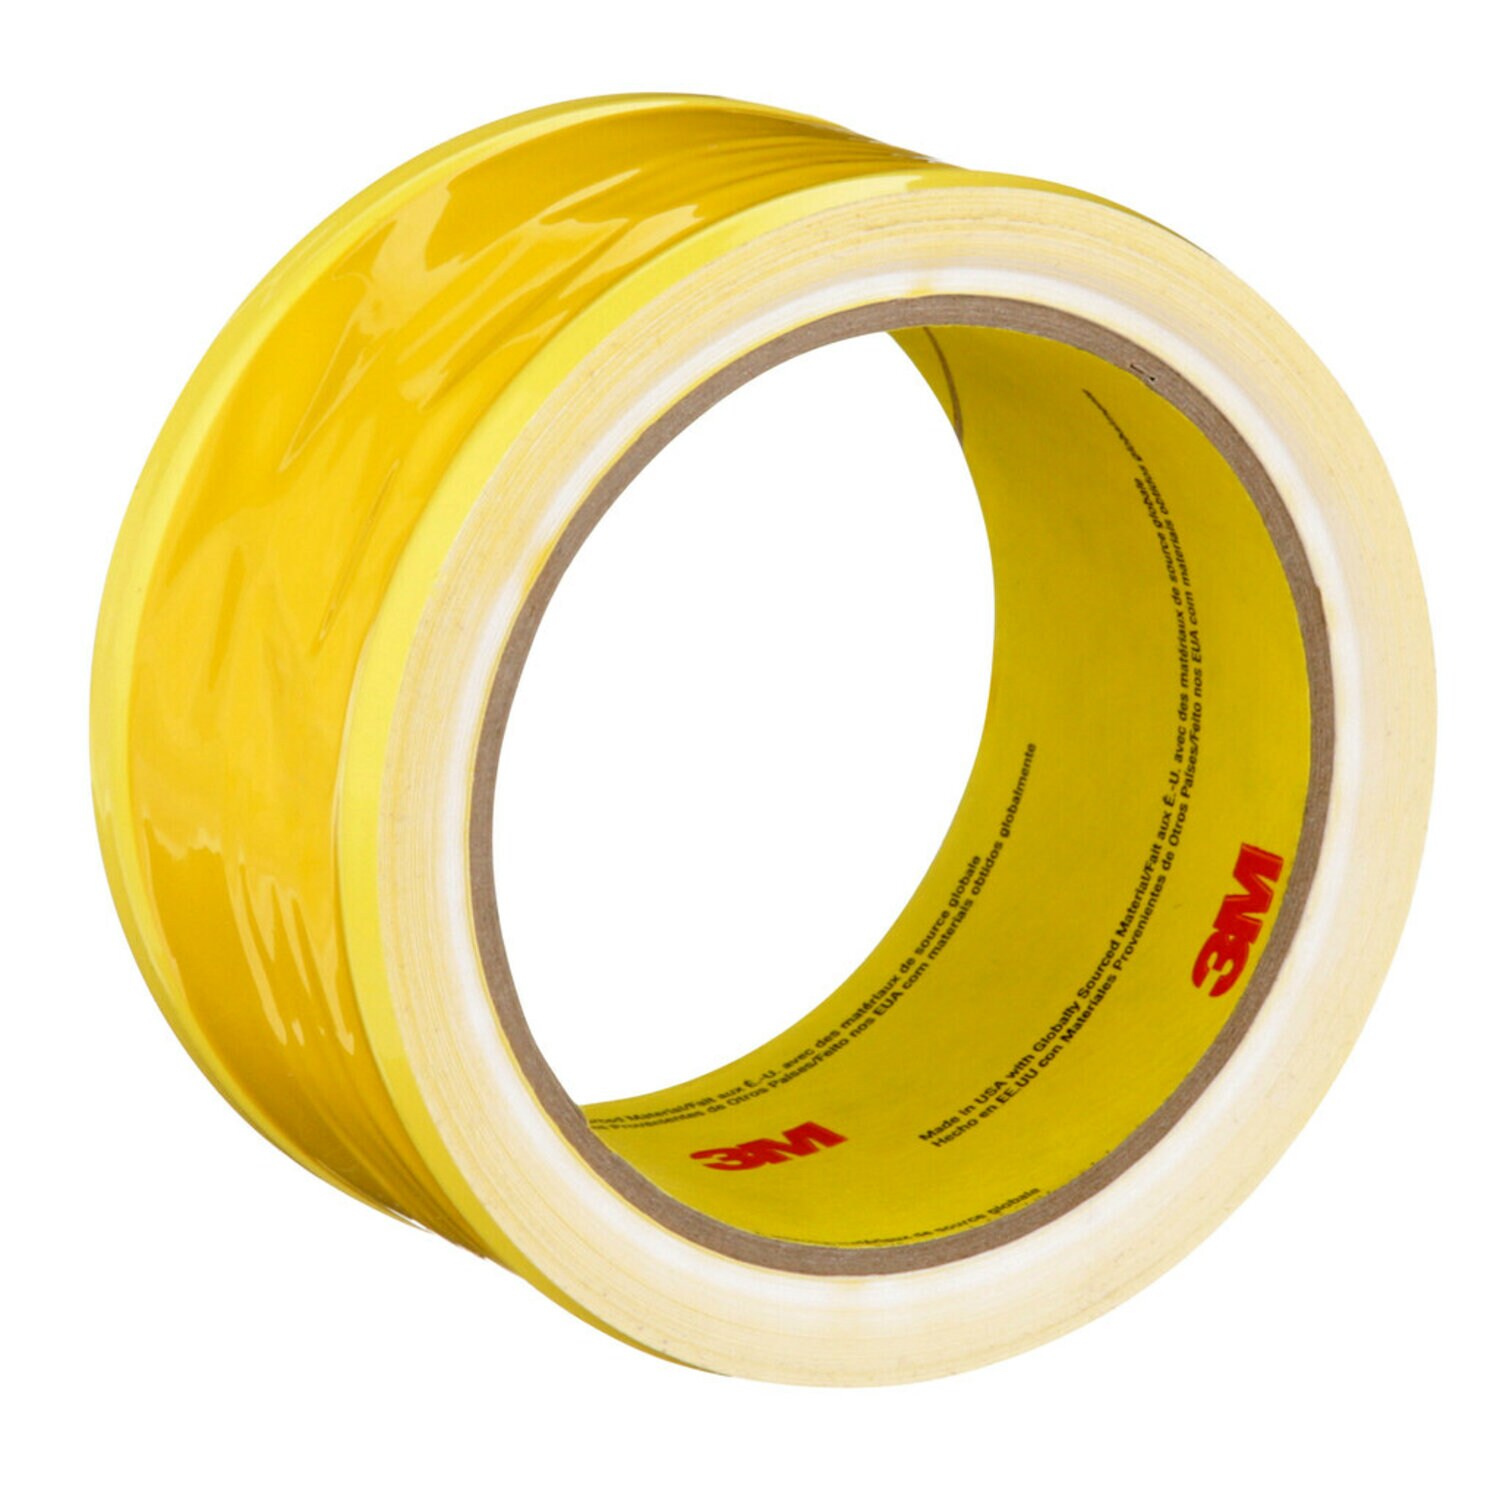 7000048596 - 3M Riveters Tape 695, Yellow with White Adhesive, 2 in x 36 yd, 3 mil,
24 rolls per case